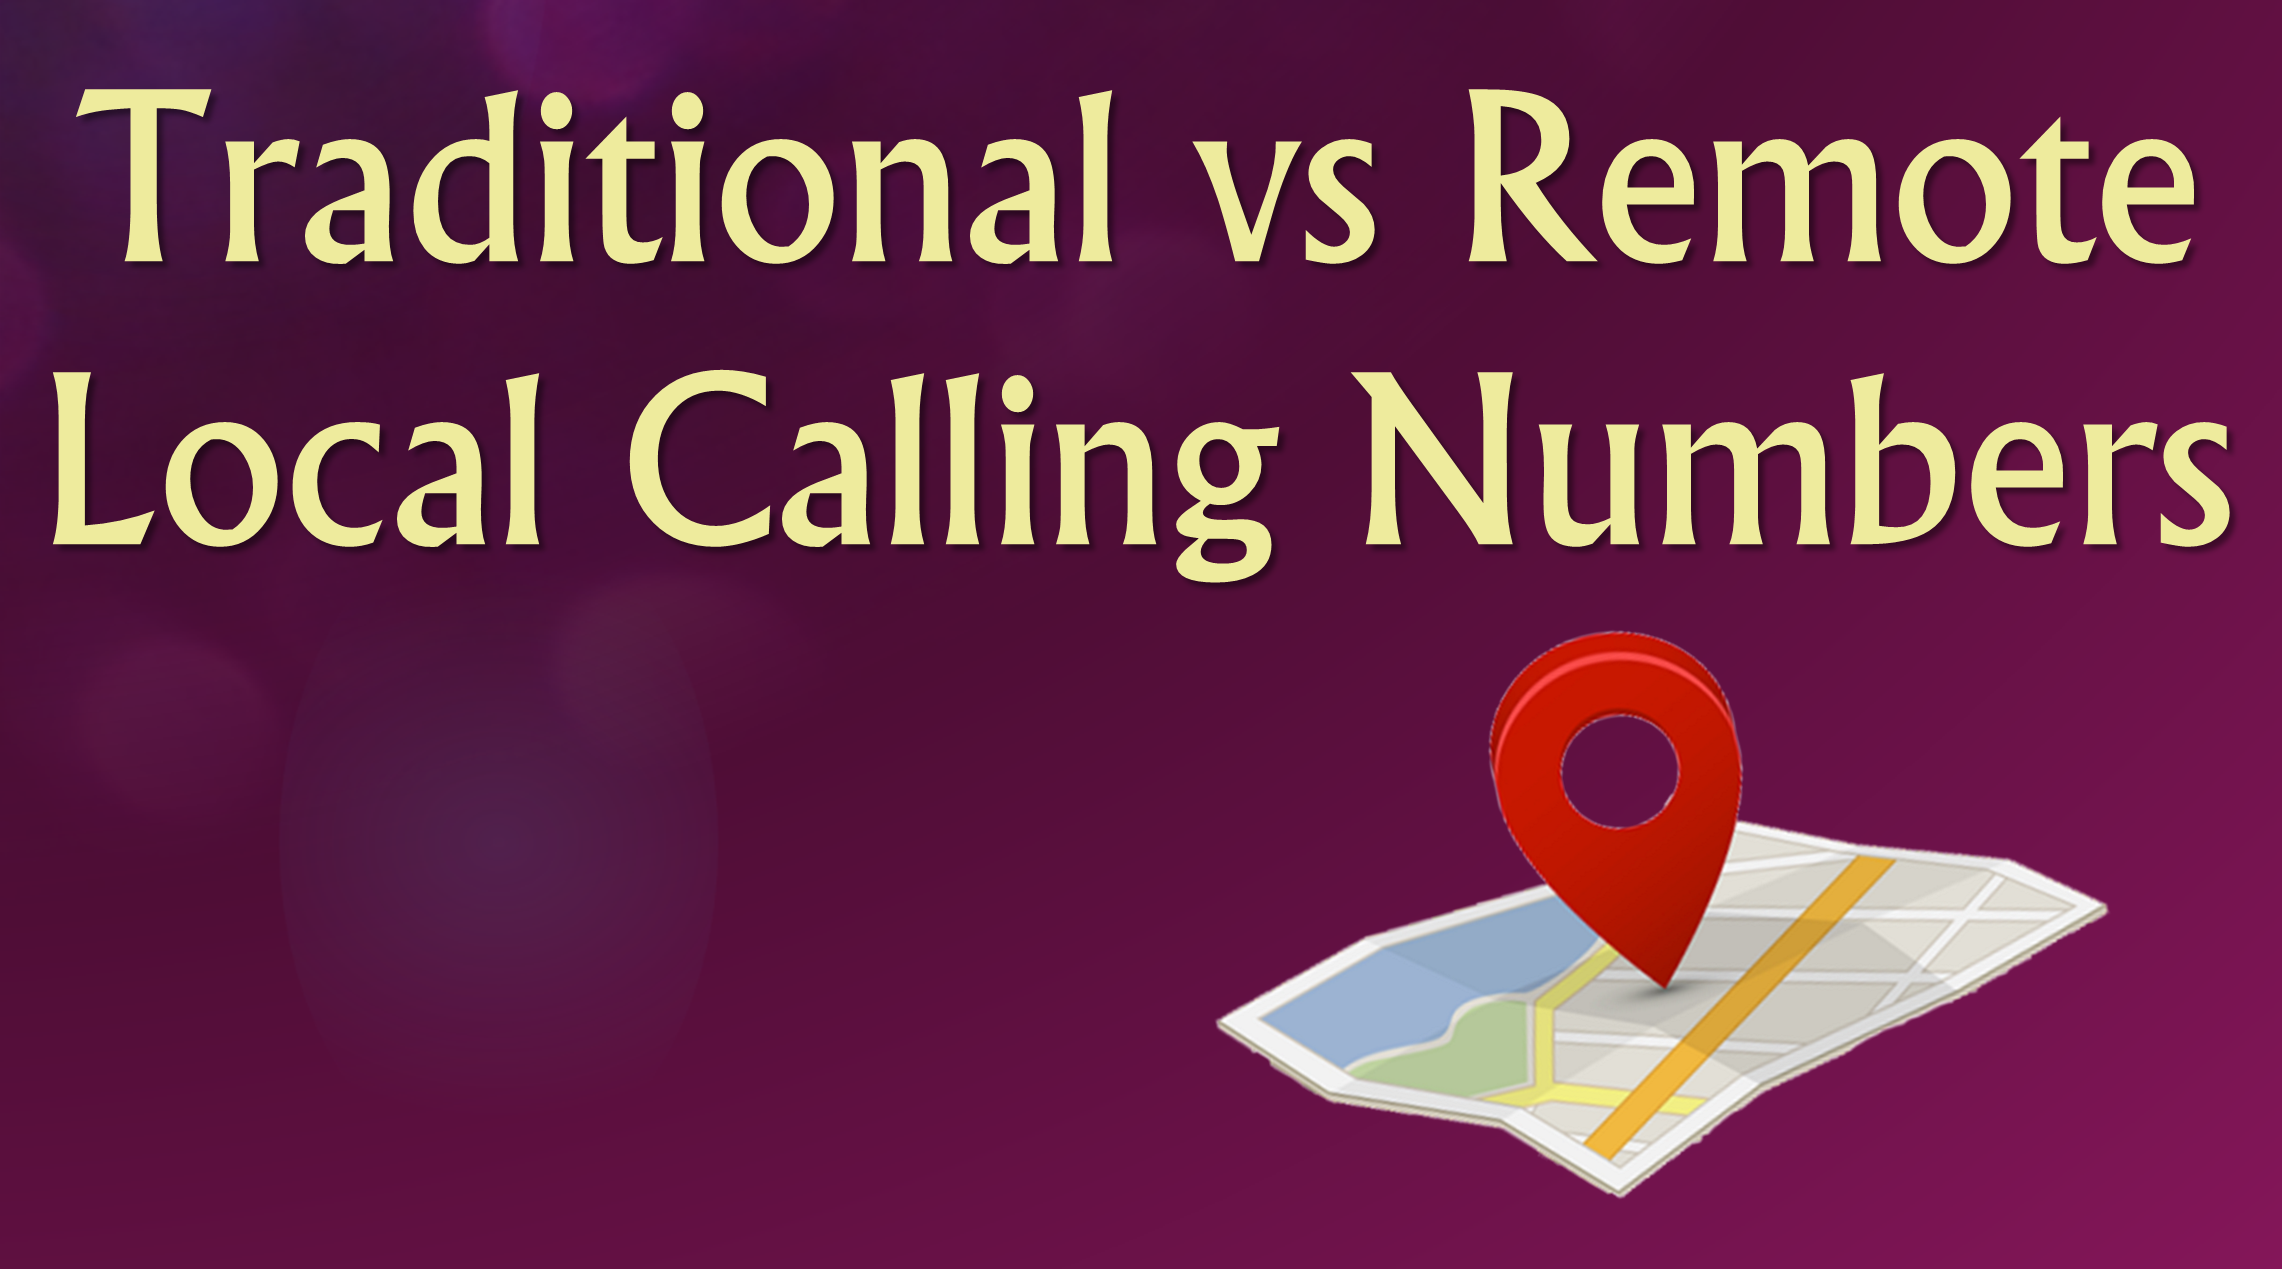 Traditional versus Remote Local Calling Numbers